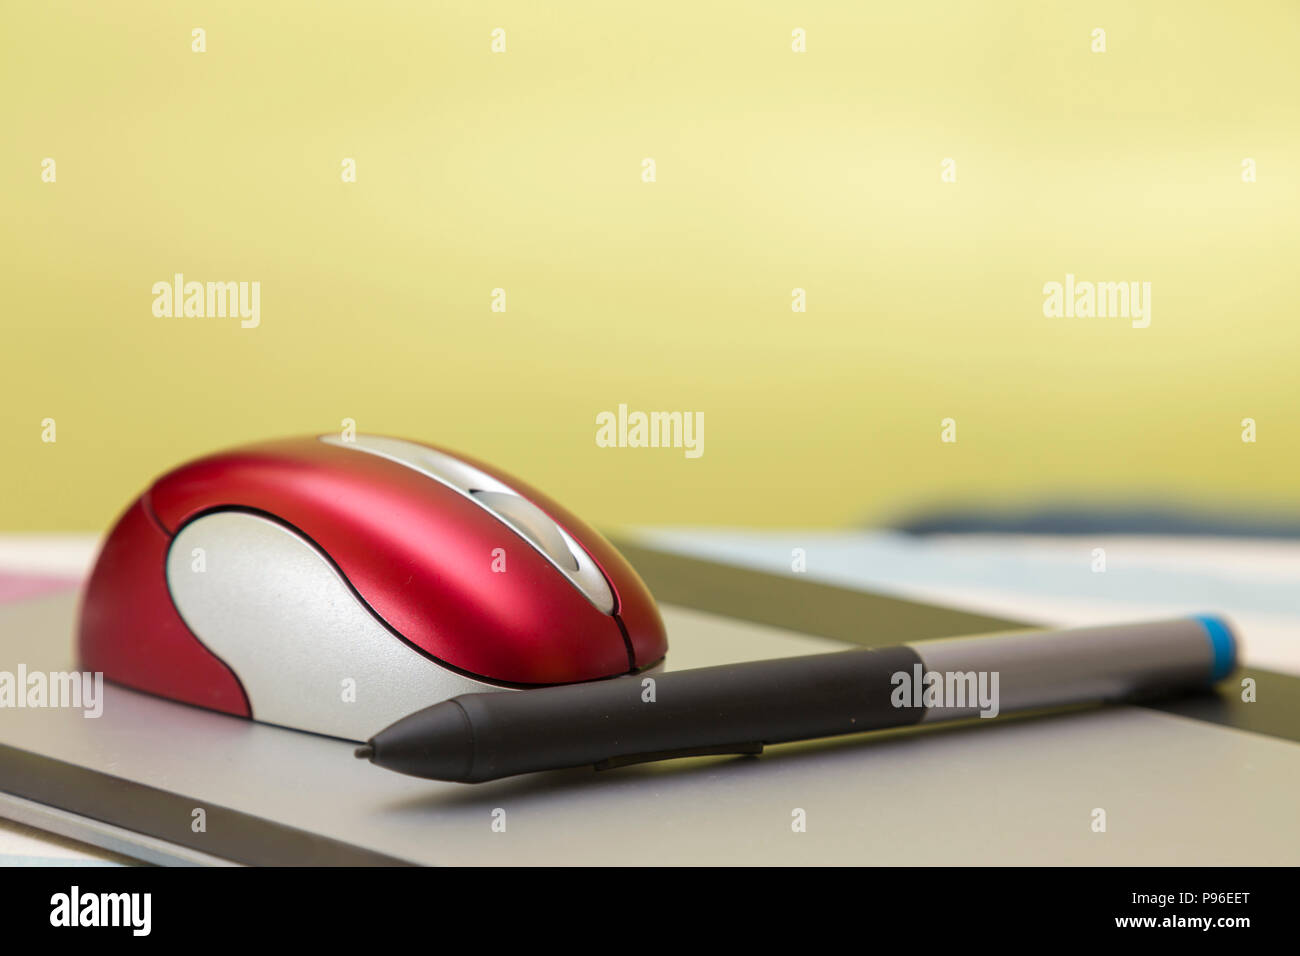 red wireless mouse and pencil, on a graphic tablet, computer peripherals Stock Photo